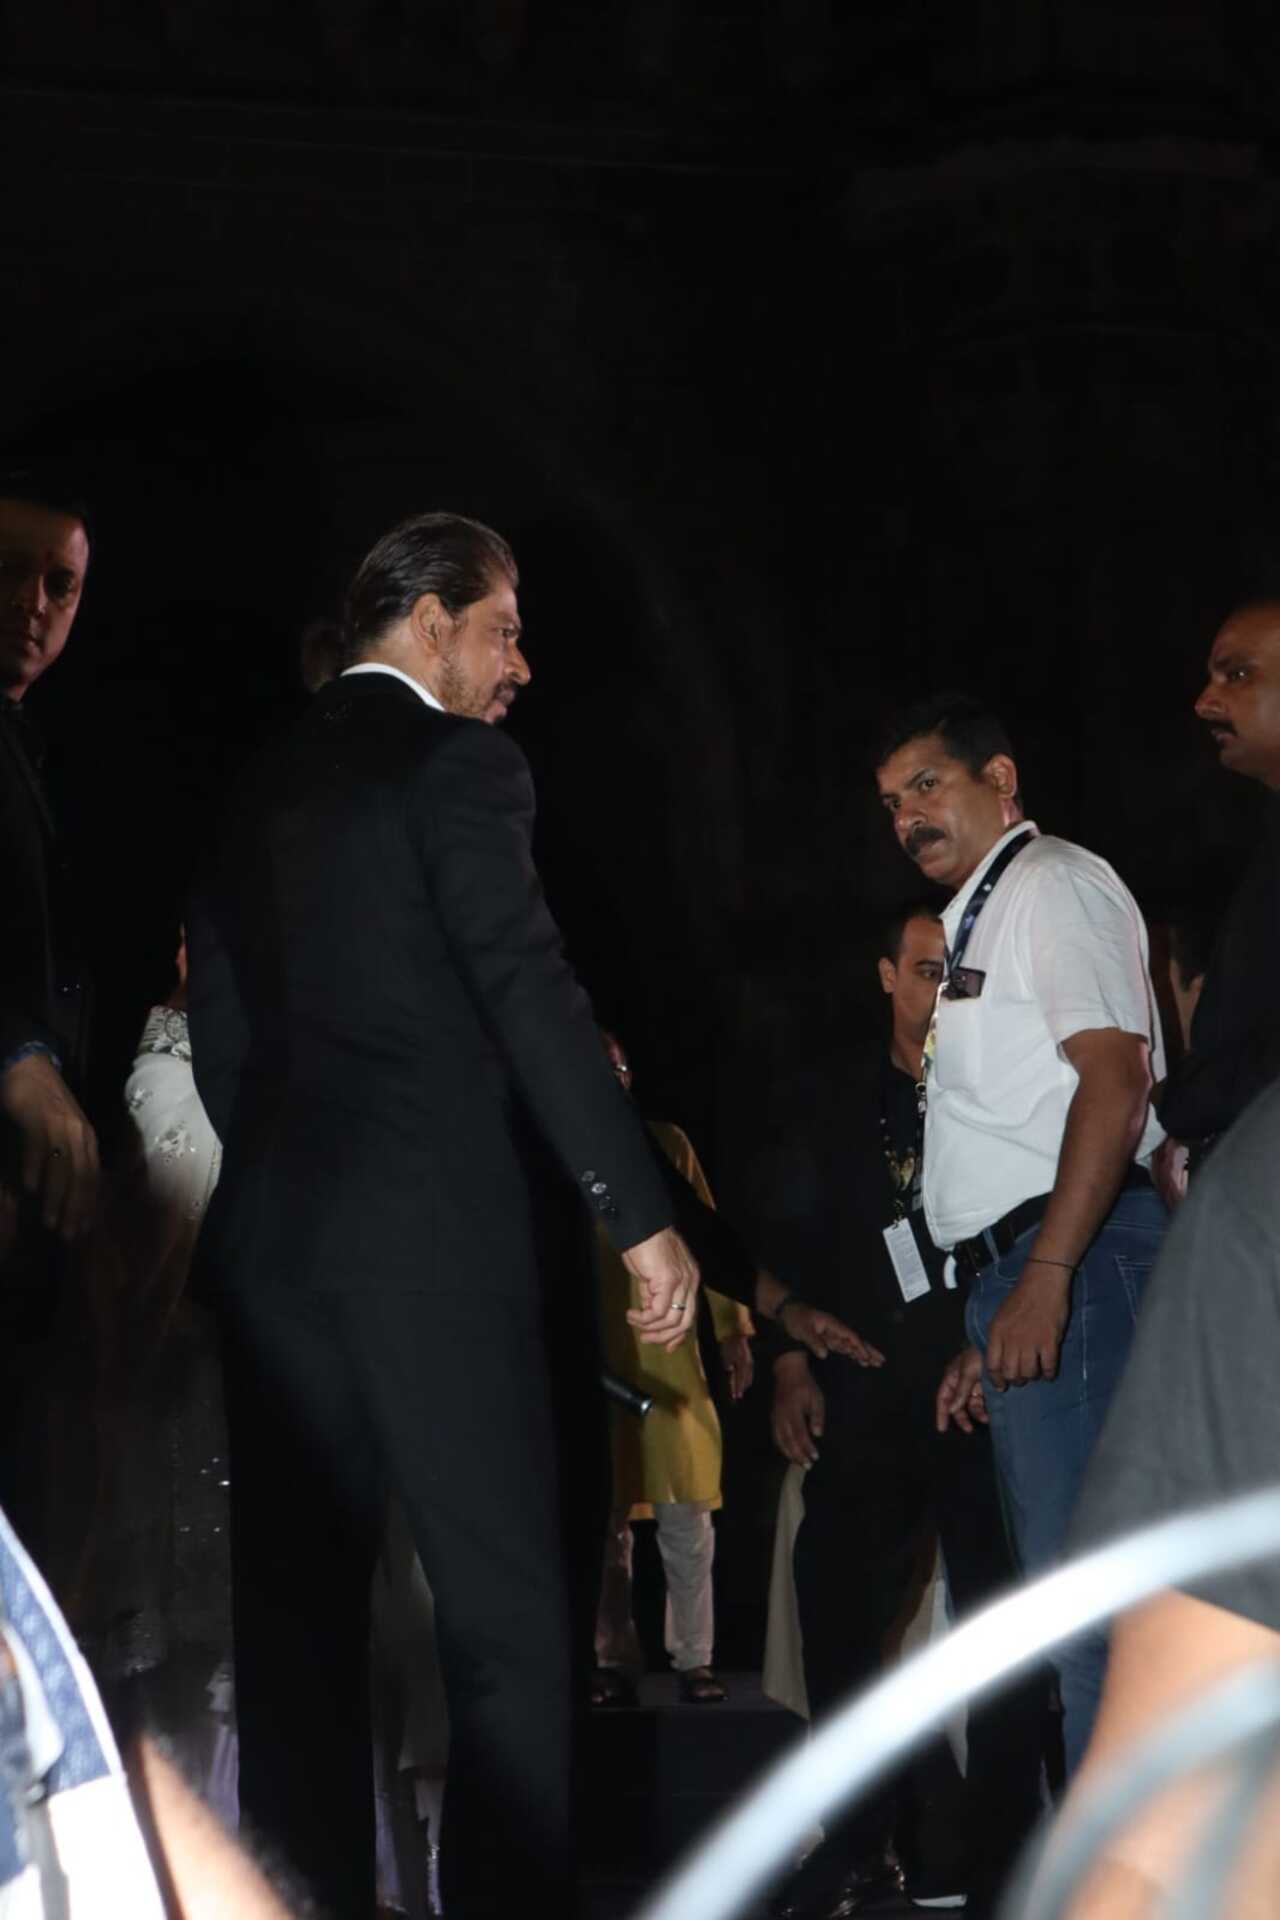 SRK was seen getting surrounded by fans who wanted to catch a glimpse of the superstar